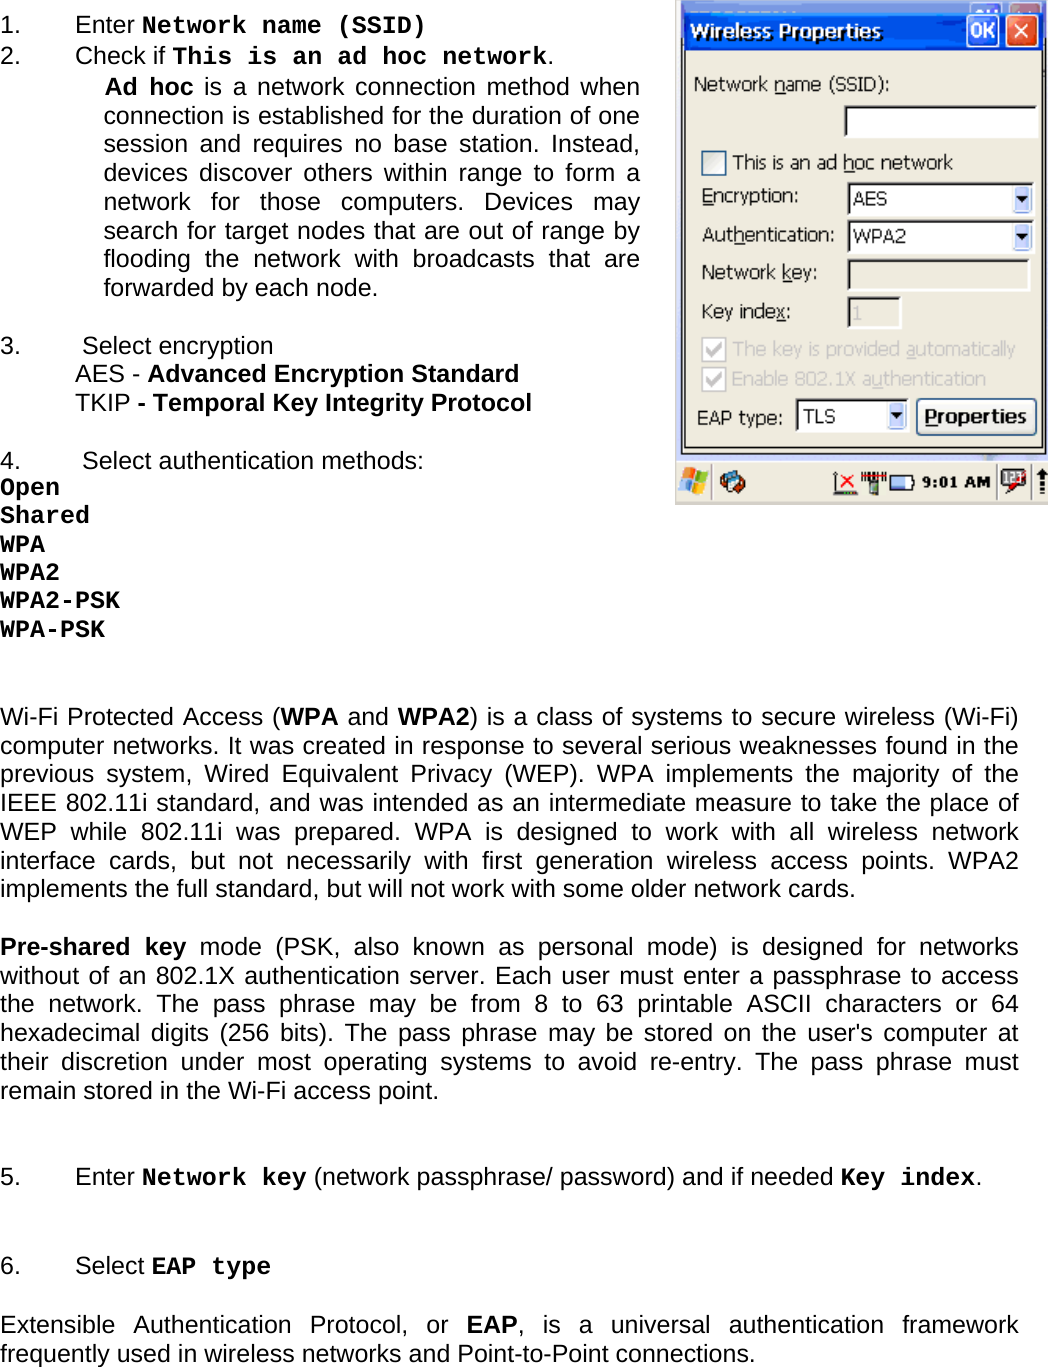 User manual  O5100 © All rights reserved. HONEYWELL     59   1.   Enter Network name (SSID) 2.   Check if This is an ad hoc network.  Ad hoc is a network connection method when connection is established for the duration of one session and requires no base station. Instead, devices discover others within range to form a network for those computers. Devices may search for target nodes that are out of range by flooding the network with broadcasts that are forwarded by each node.  3.   Select encryption  AES - Advanced Encryption Standard TKIP - Temporal Key Integrity Protocol  4.   Select authentication methods: Open Shared WPA WPA2 WPA2-PSK WPA-PSK   Wi-Fi Protected Access (WPA and WPA2) is a class of systems to secure wireless (Wi-Fi) computer networks. It was created in response to several serious weaknesses found in the previous system, Wired Equivalent Privacy (WEP). WPA implements the majority of the IEEE 802.11i standard, and was intended as an intermediate measure to take the place of WEP while 802.11i was prepared. WPA is designed to work with all wireless network interface cards, but not necessarily with first generation wireless access points. WPA2 implements the full standard, but will not work with some older network cards.  Pre-shared key mode (PSK, also known as personal mode) is designed for networks without of an 802.1X authentication server. Each user must enter a passphrase to access the network. The pass phrase may be from 8 to 63 printable ASCII characters or 64 hexadecimal digits (256 bits). The pass phrase may be stored on the user&apos;s computer at their discretion under most operating systems to avoid re-entry. The pass phrase must remain stored in the Wi-Fi access point.   5.   Enter Network key (network passphrase/ password) and if needed Key index.   6.   Select EAP type  Extensible Authentication Protocol, or EAP, is a universal authentication framework frequently used in wireless networks and Point-to-Point connections.  